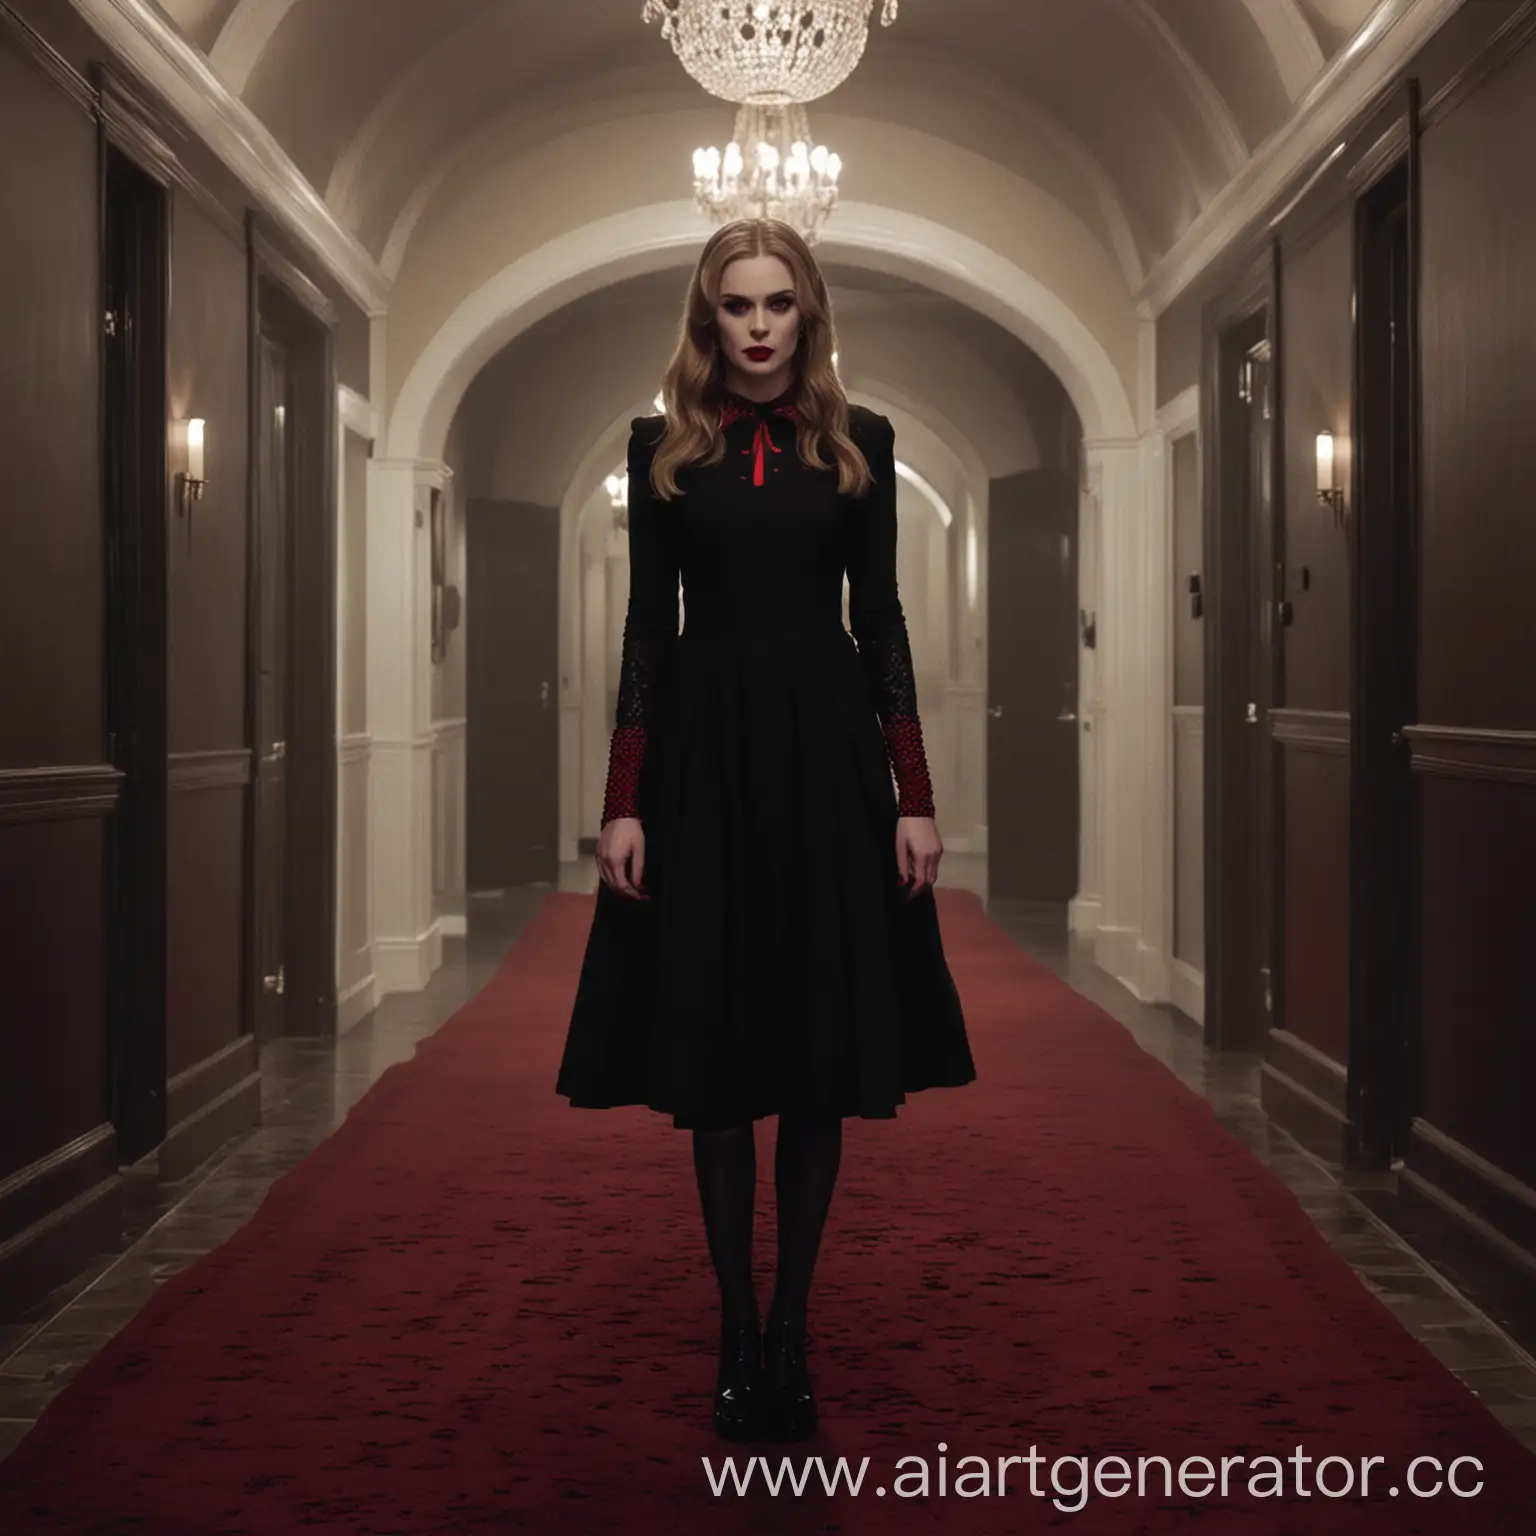 Eerie-American-Horror-Story-Scene-with-Black-and-Red-Tones